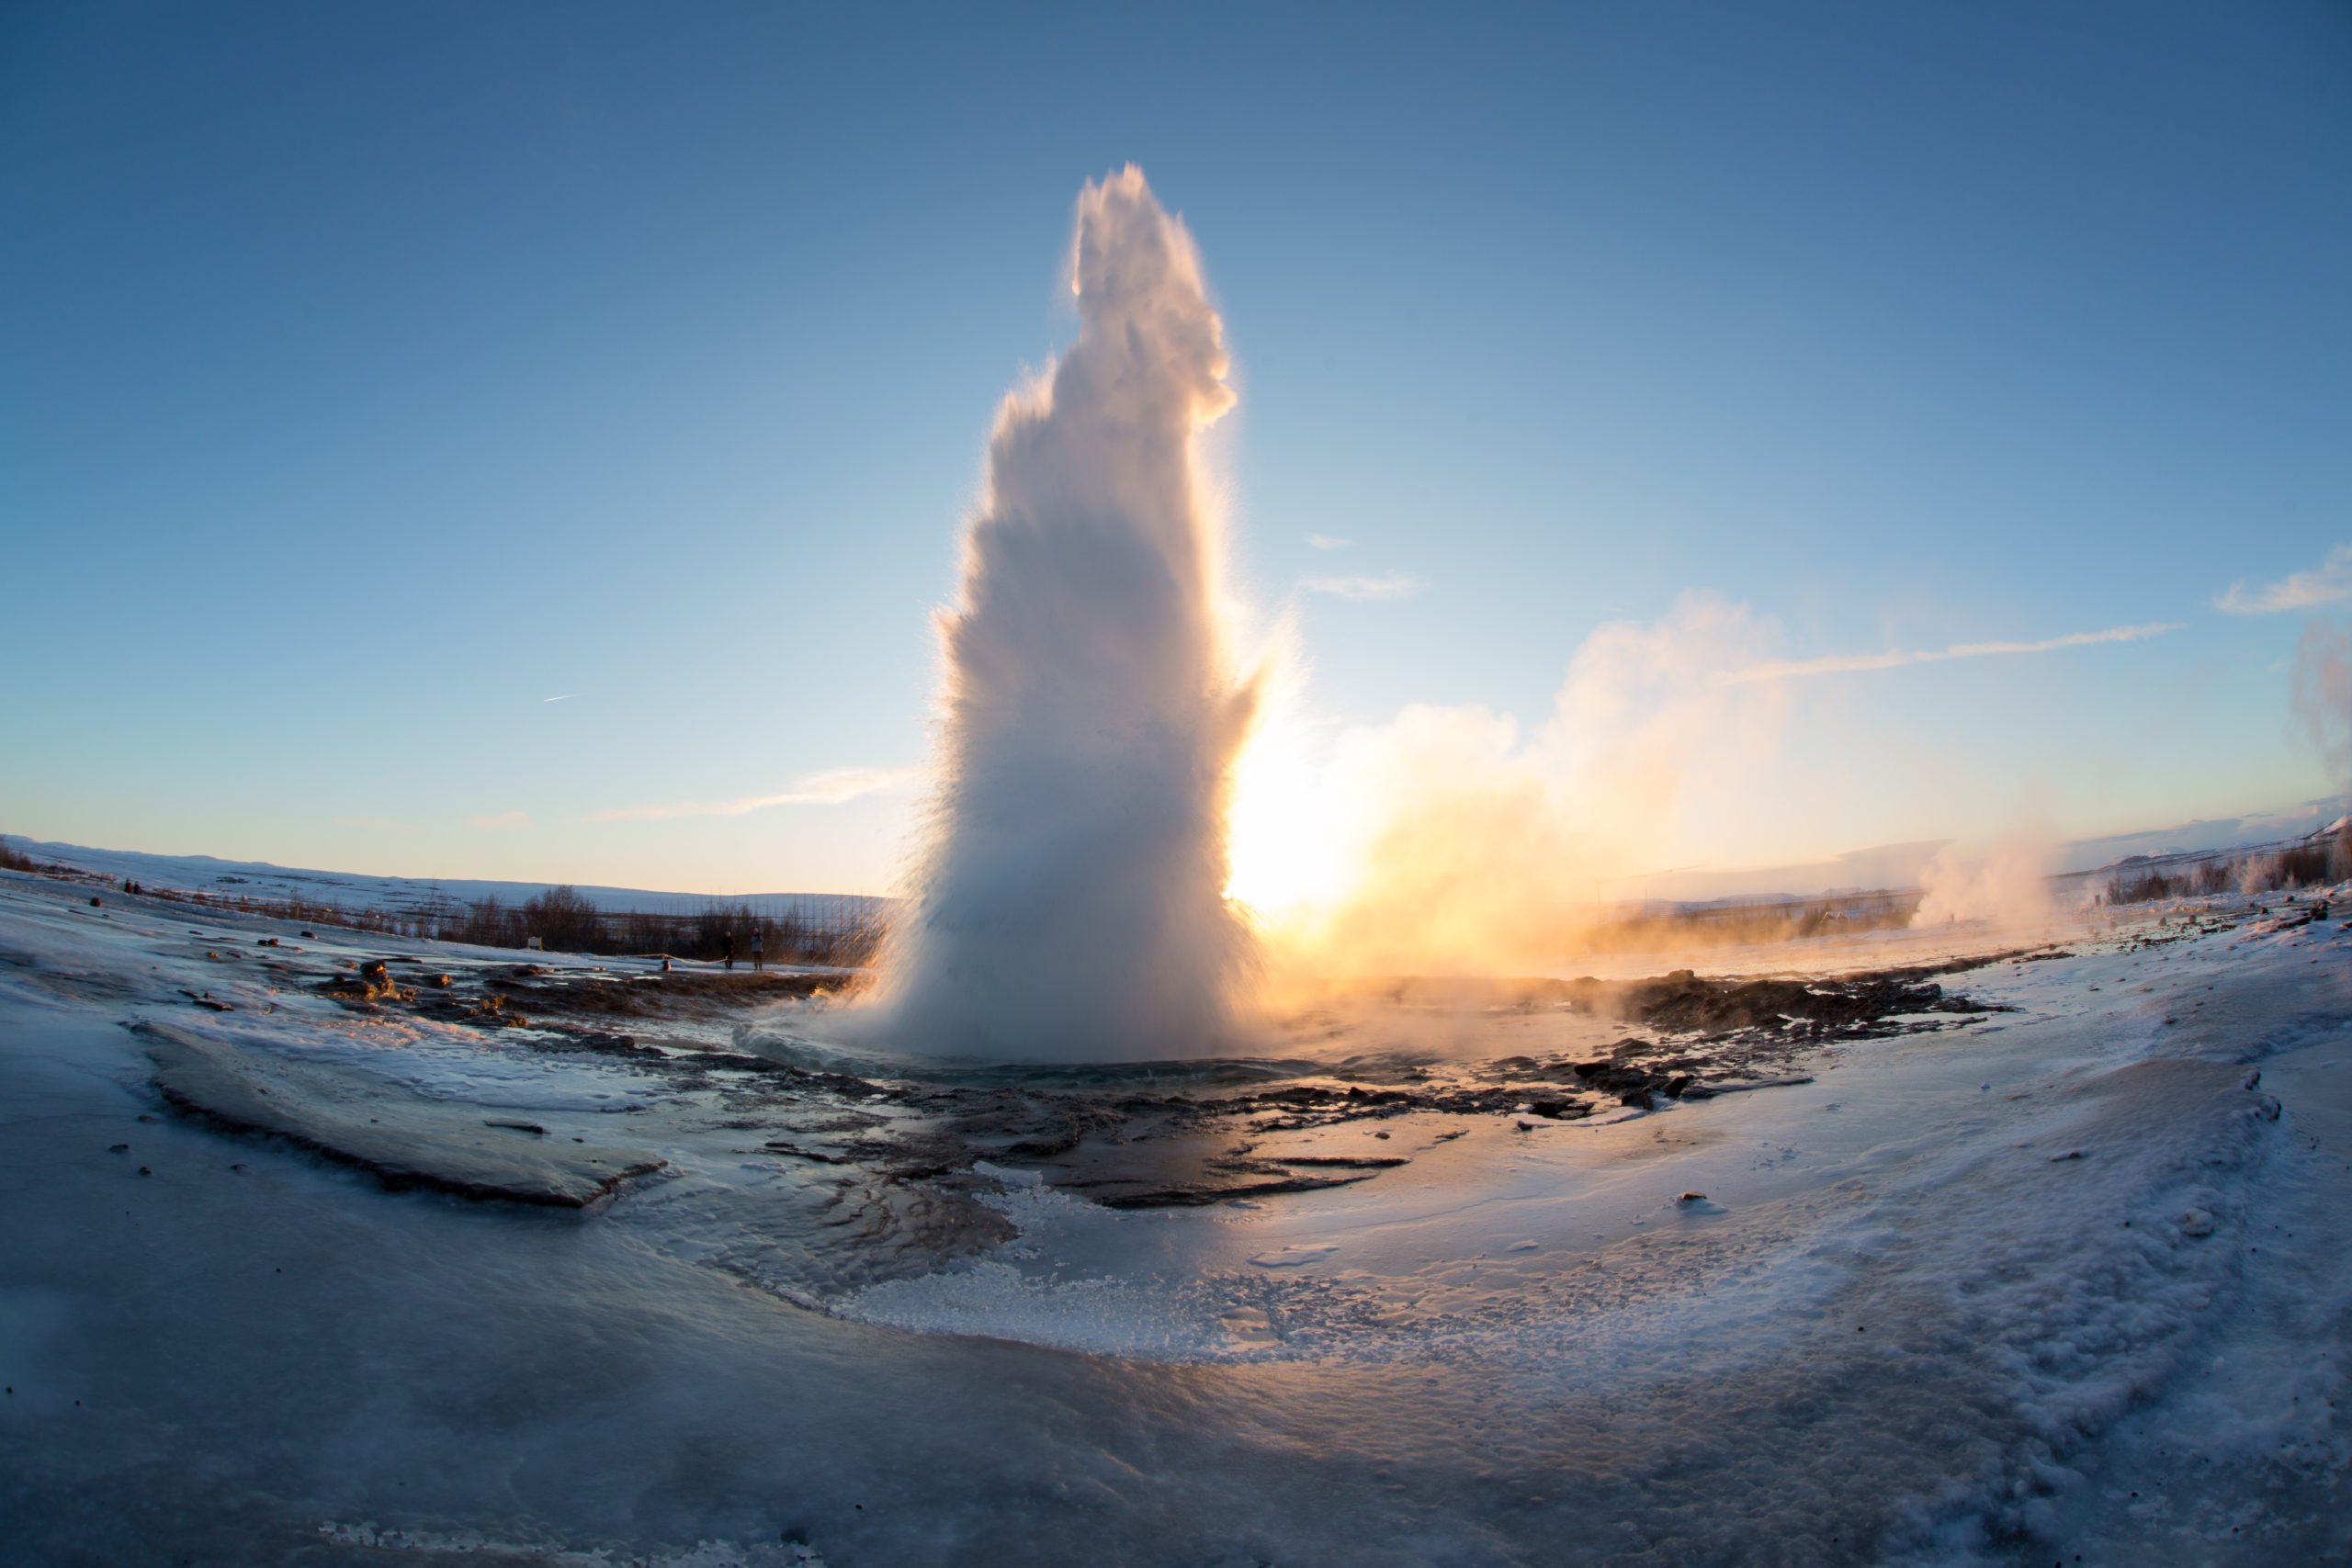 Explore The Geysir Geothermal Area In Our Golden Circle And Horse Riding Tour